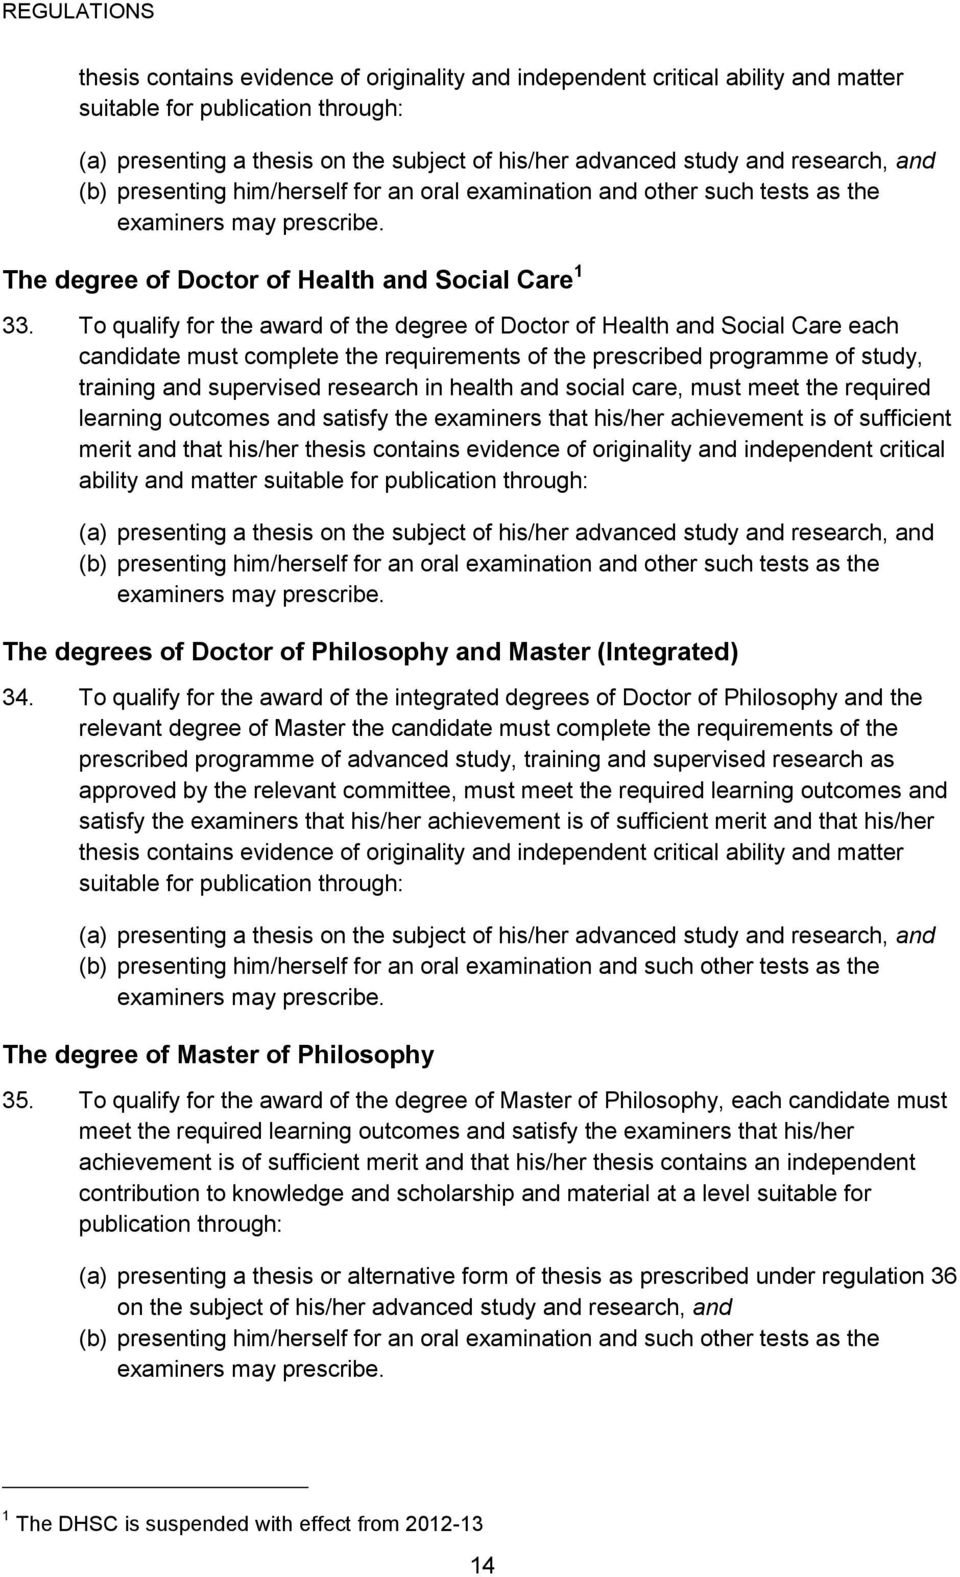 To qualify for the award of the degree of Doctor of Health and Social Care each candidate must complete the requirements of the prescribed programme of study, training and supervised research in